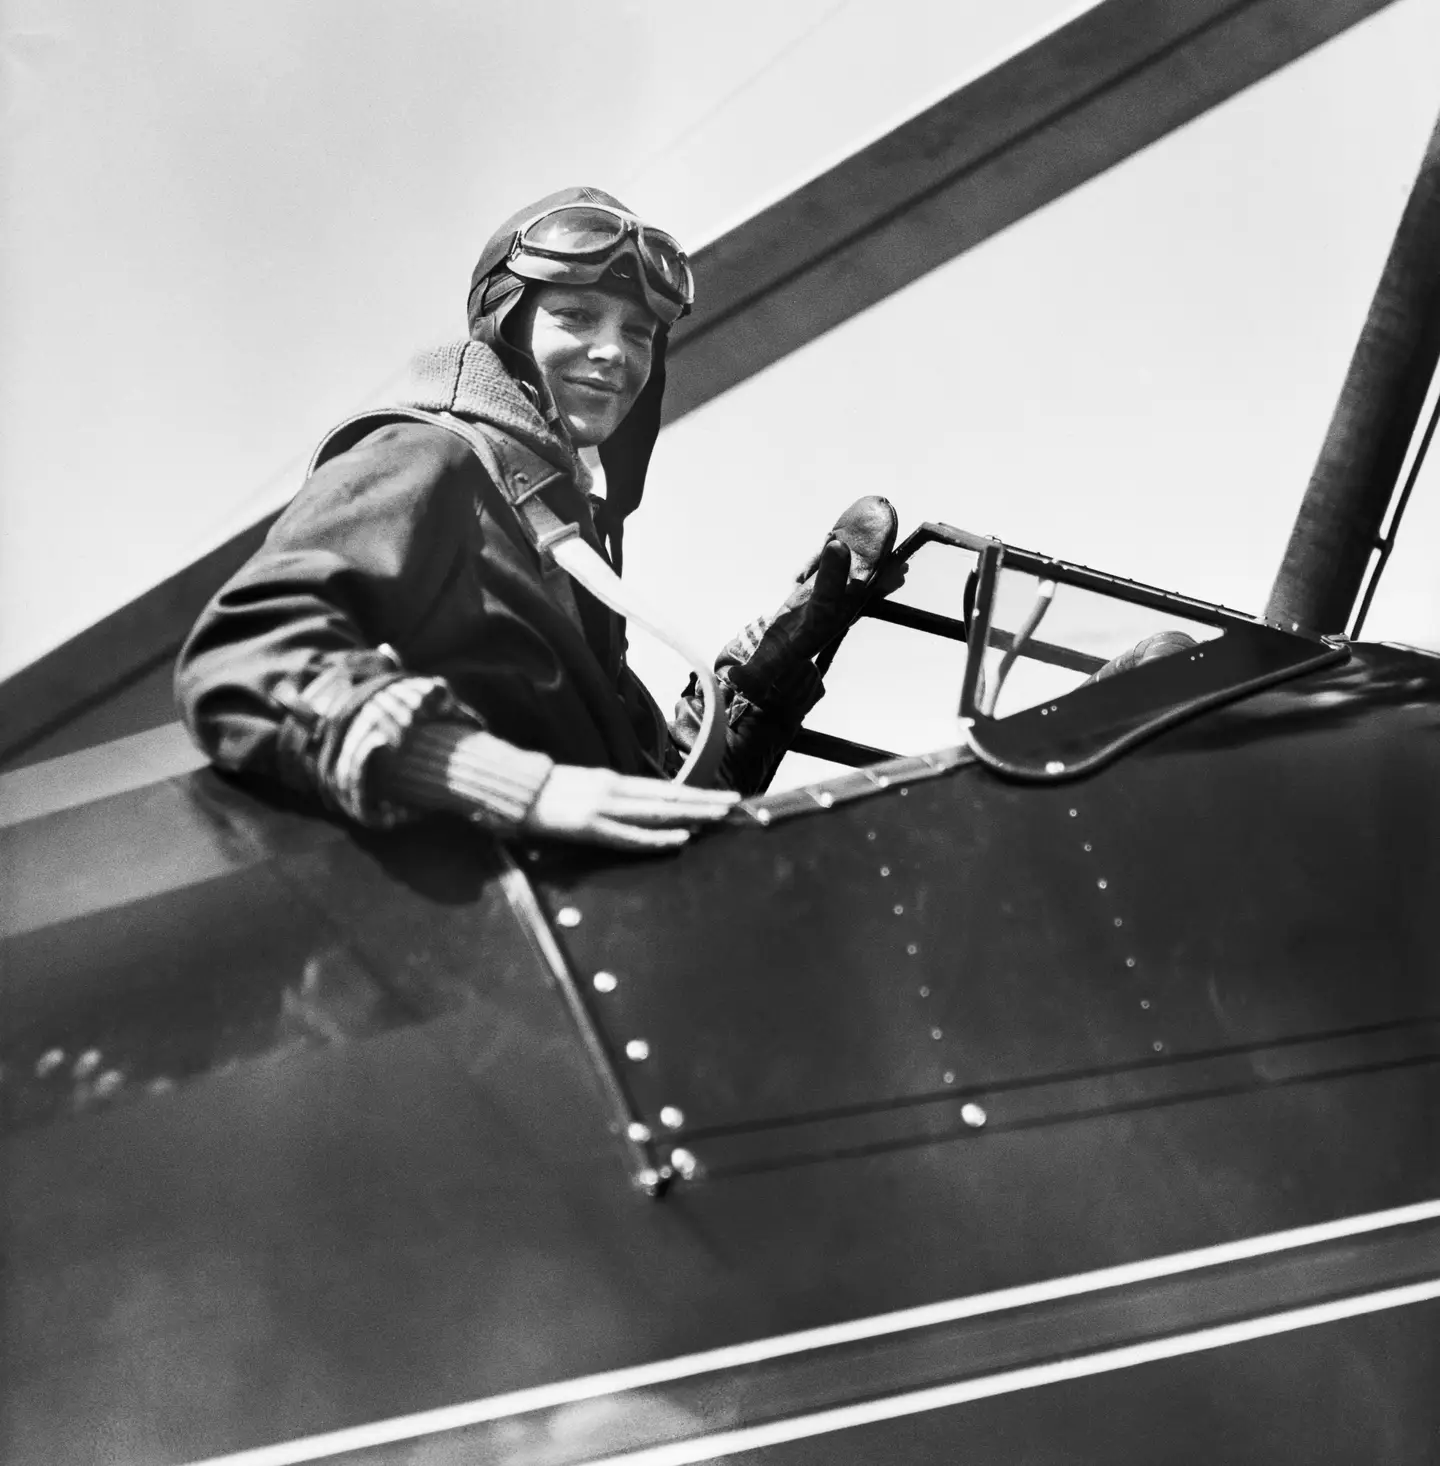 Amelia Earhart went missing while flying over the Pacific.